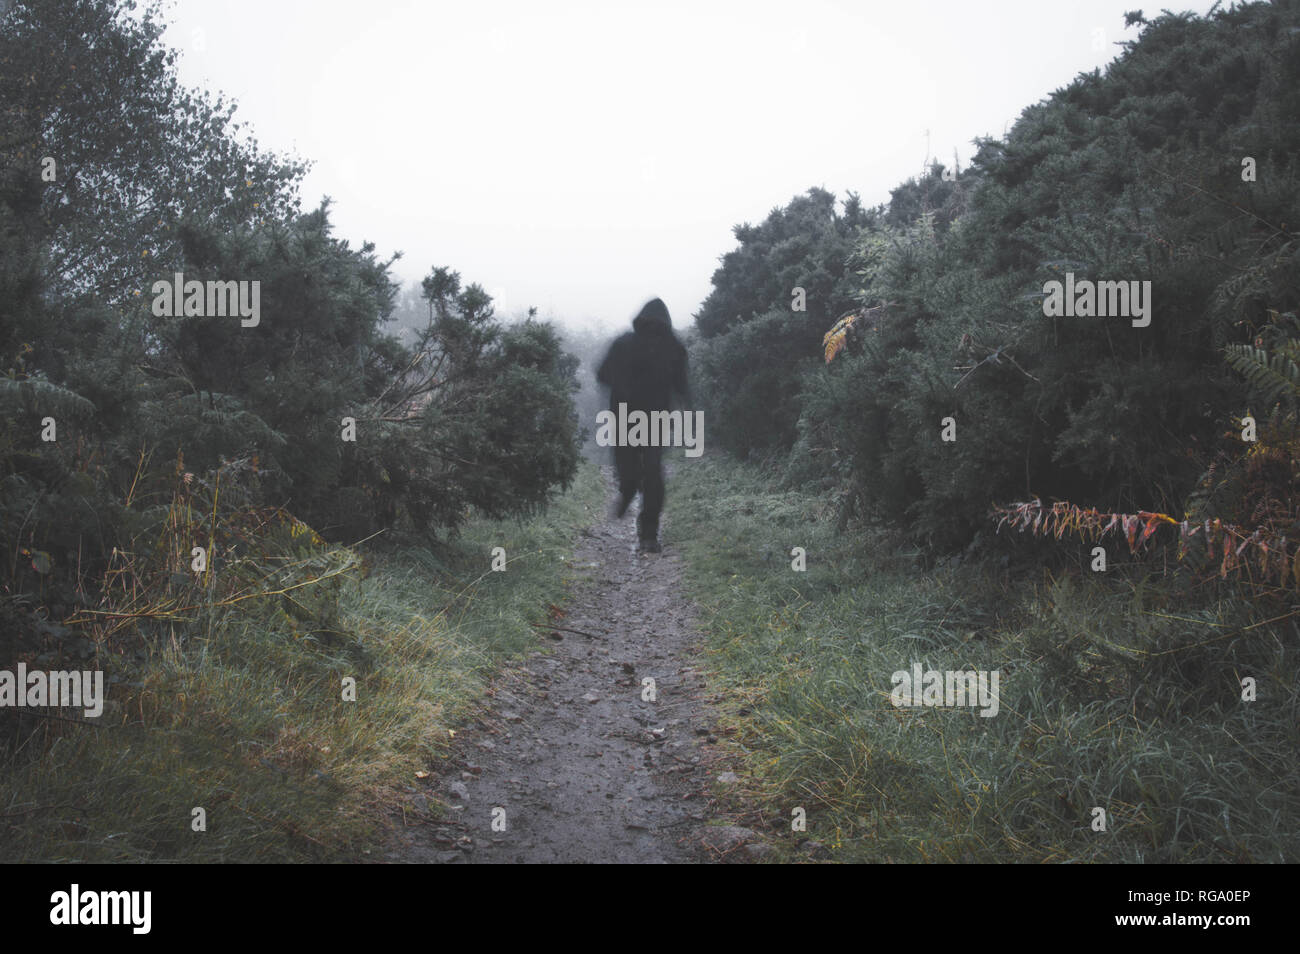 A sinister blurred hooded figure running towards the camera on a country path on a foggy rainy day. With a muted, dark edit. Stock Photo